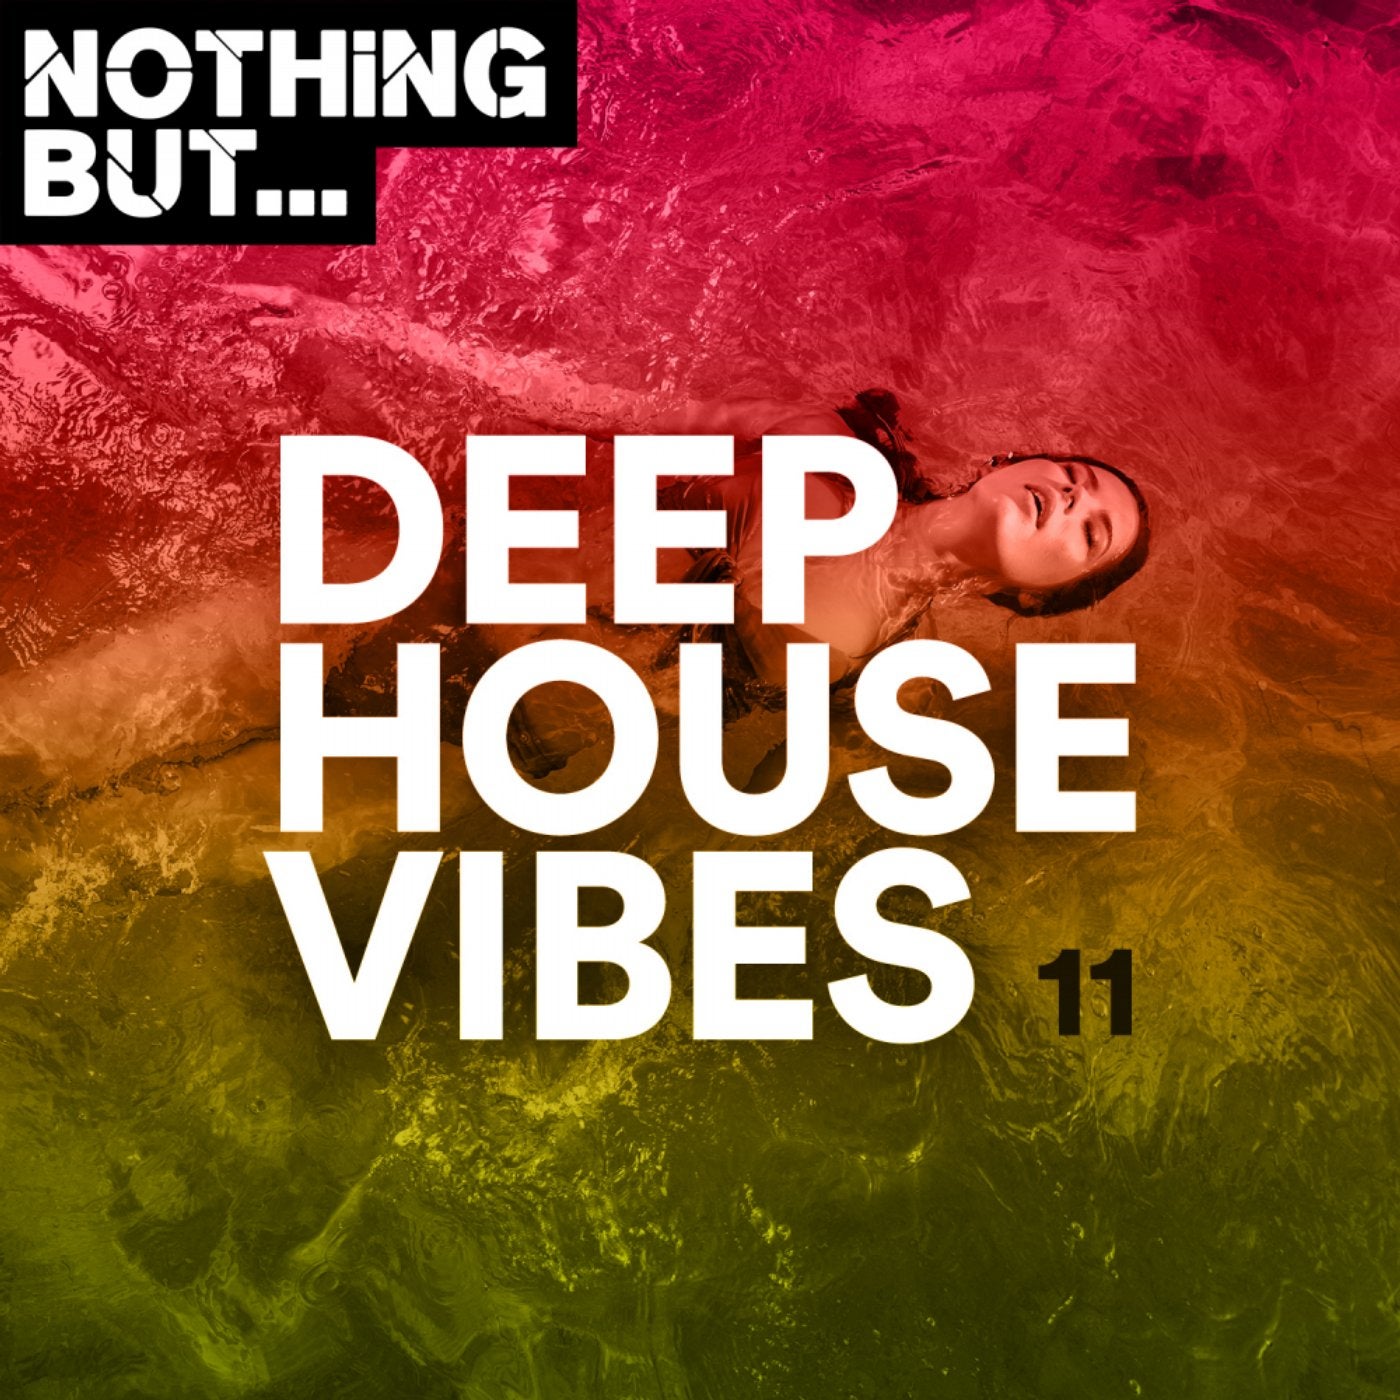 Nothing But... Deep House Vibes, Vol. 11